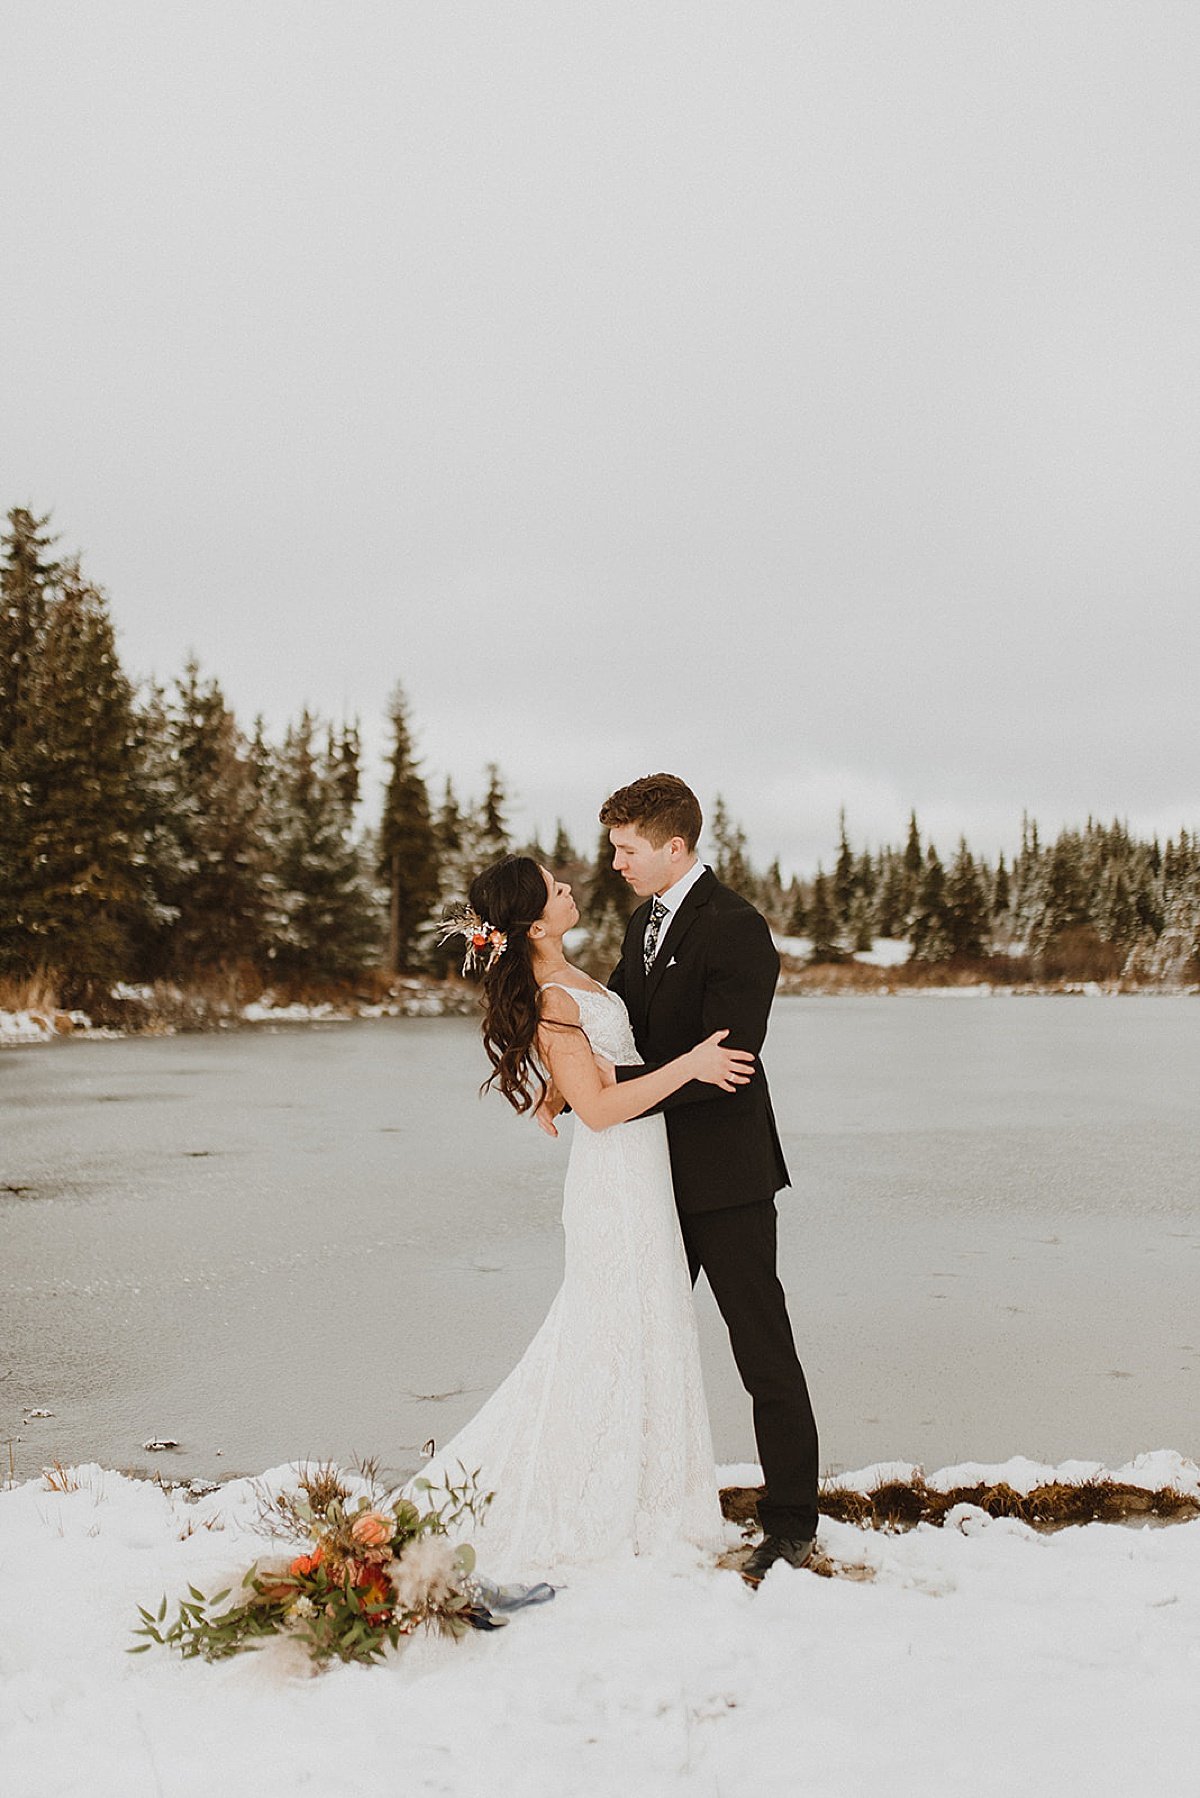  bride and groom pose at winter lake with pine trees and autumn bouquet in snowy fall wedding  